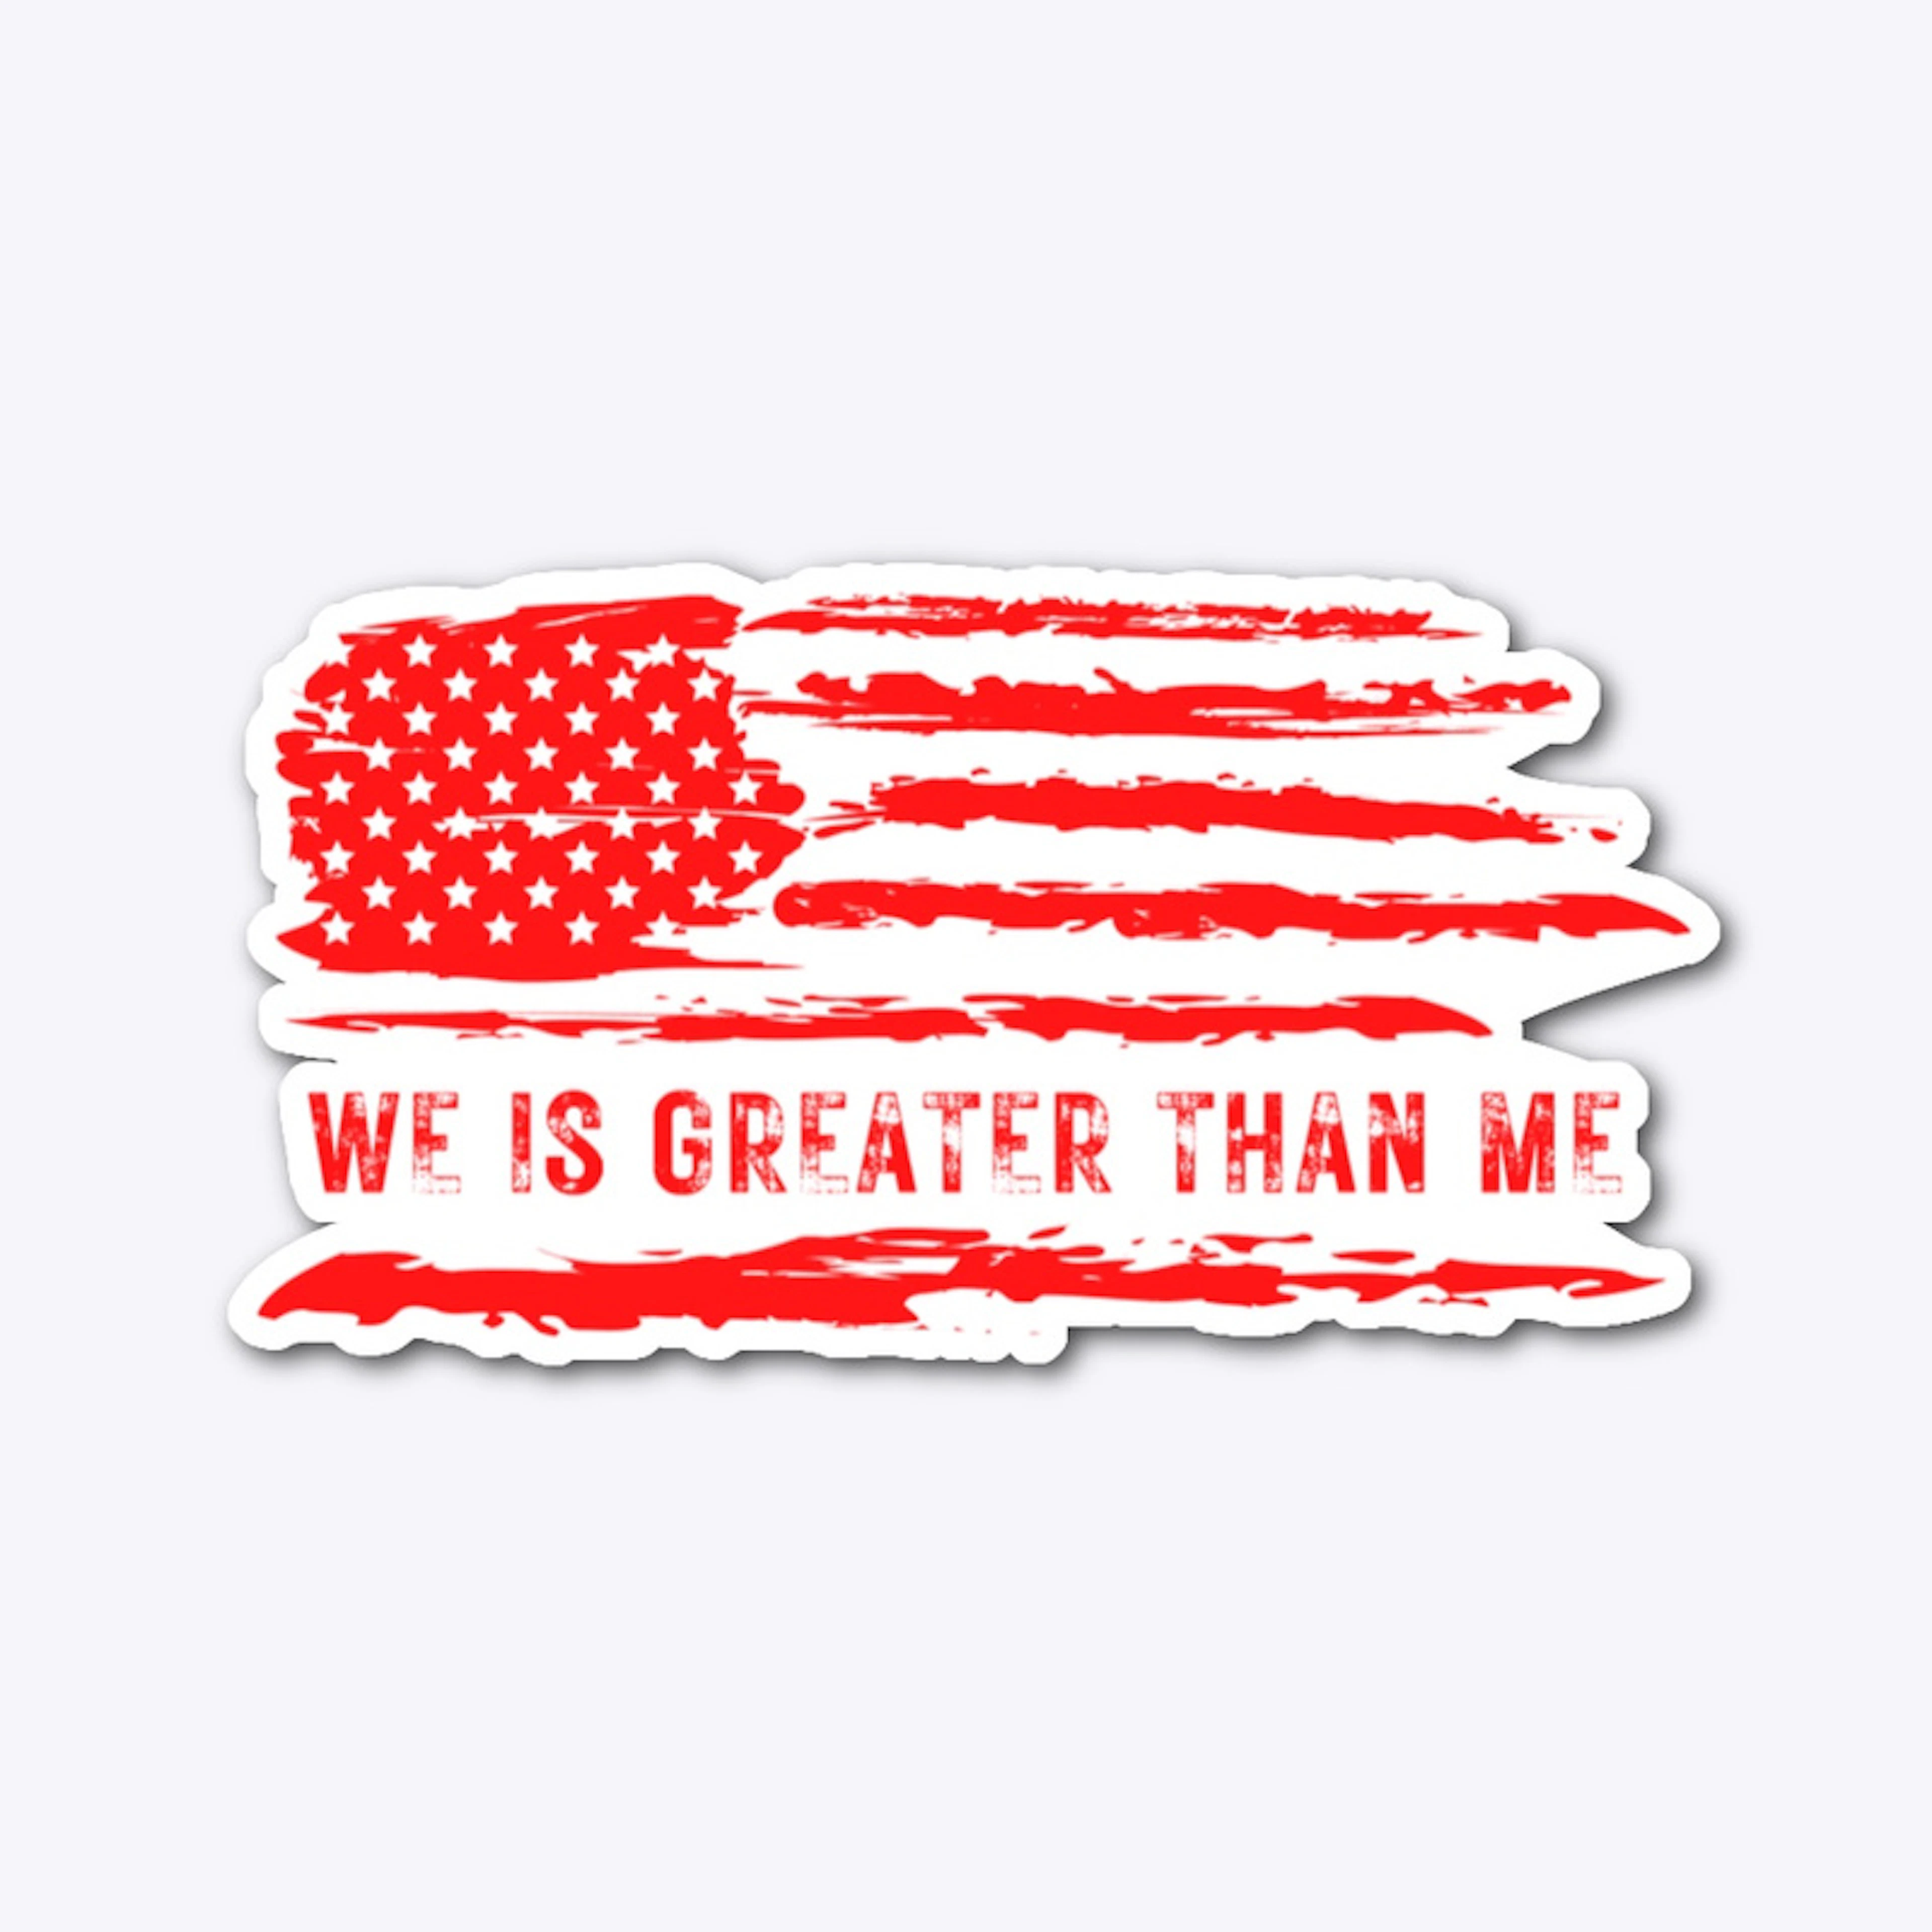 WE IS GREATER THAN ME DIE CUT STICKER